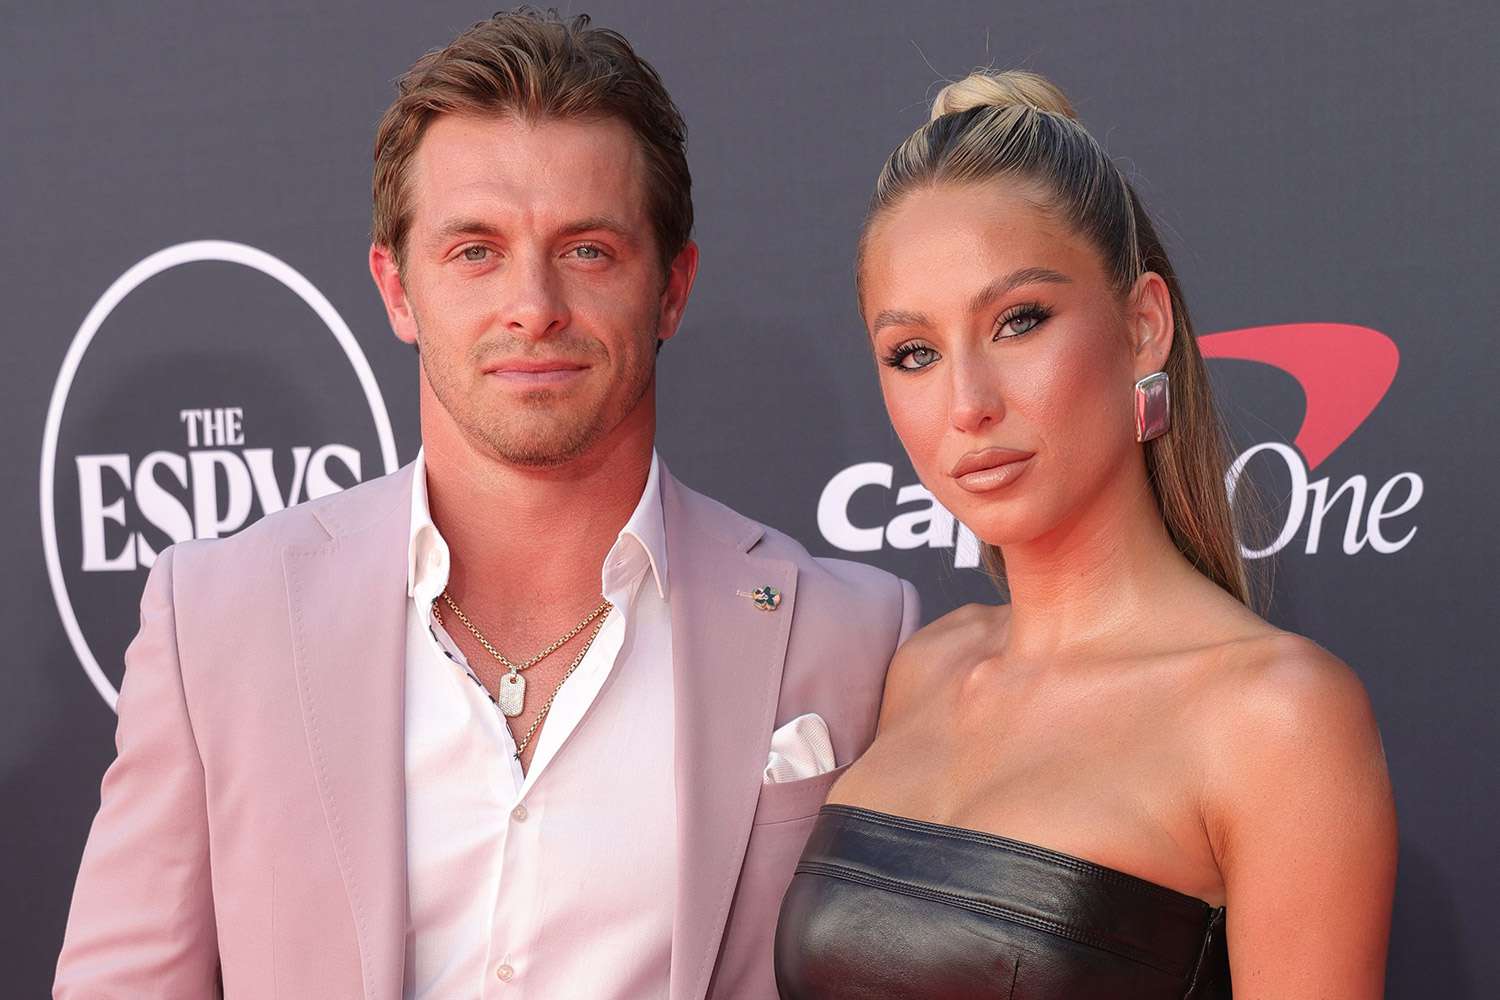 What are the rumors related to Alix Earle and Braxton Berrios love life?